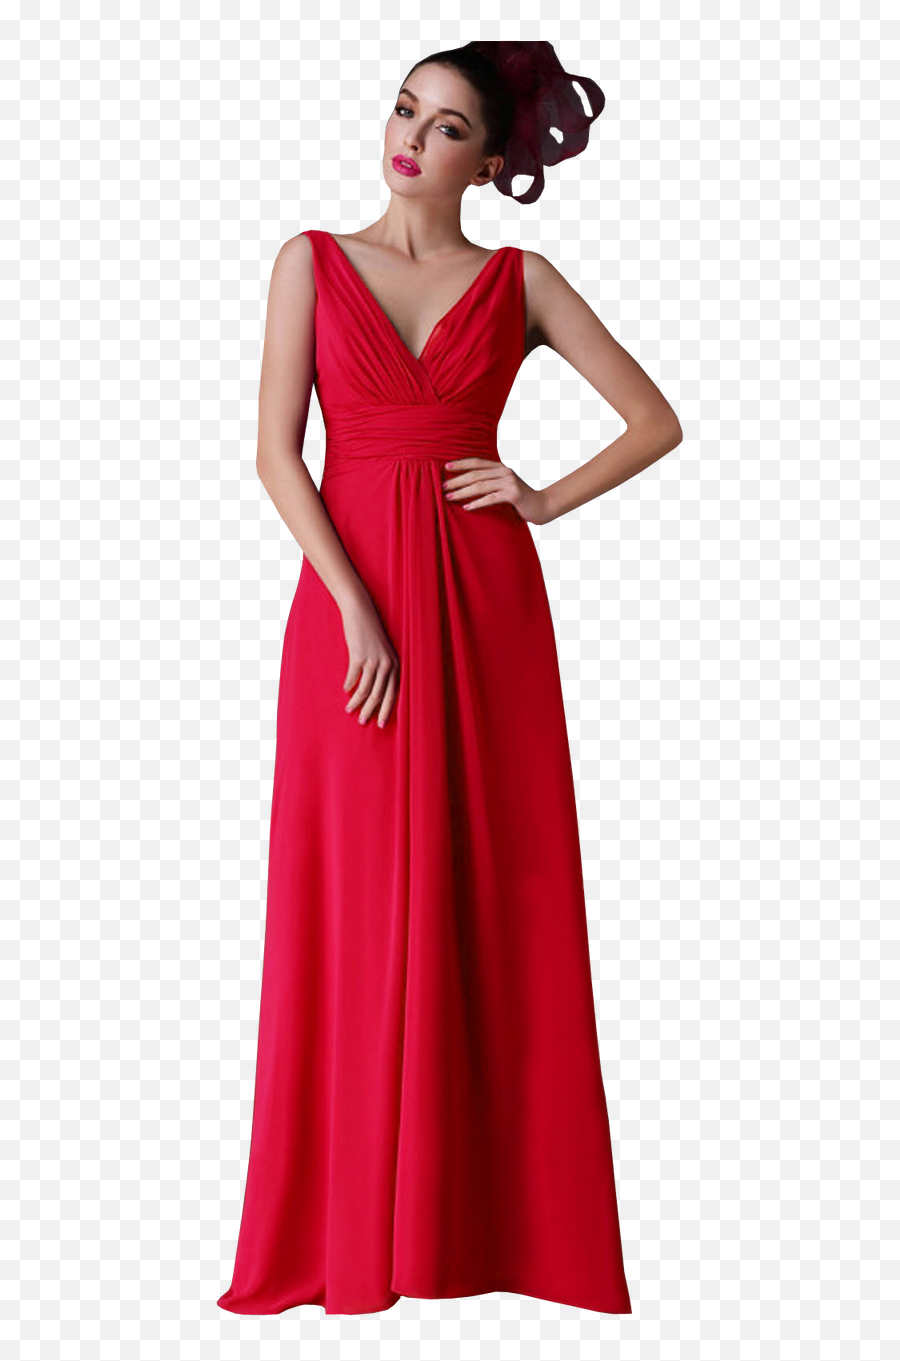 New V - Neck Chiffon Party Prom Dress Gown Png,Prom Dress Png